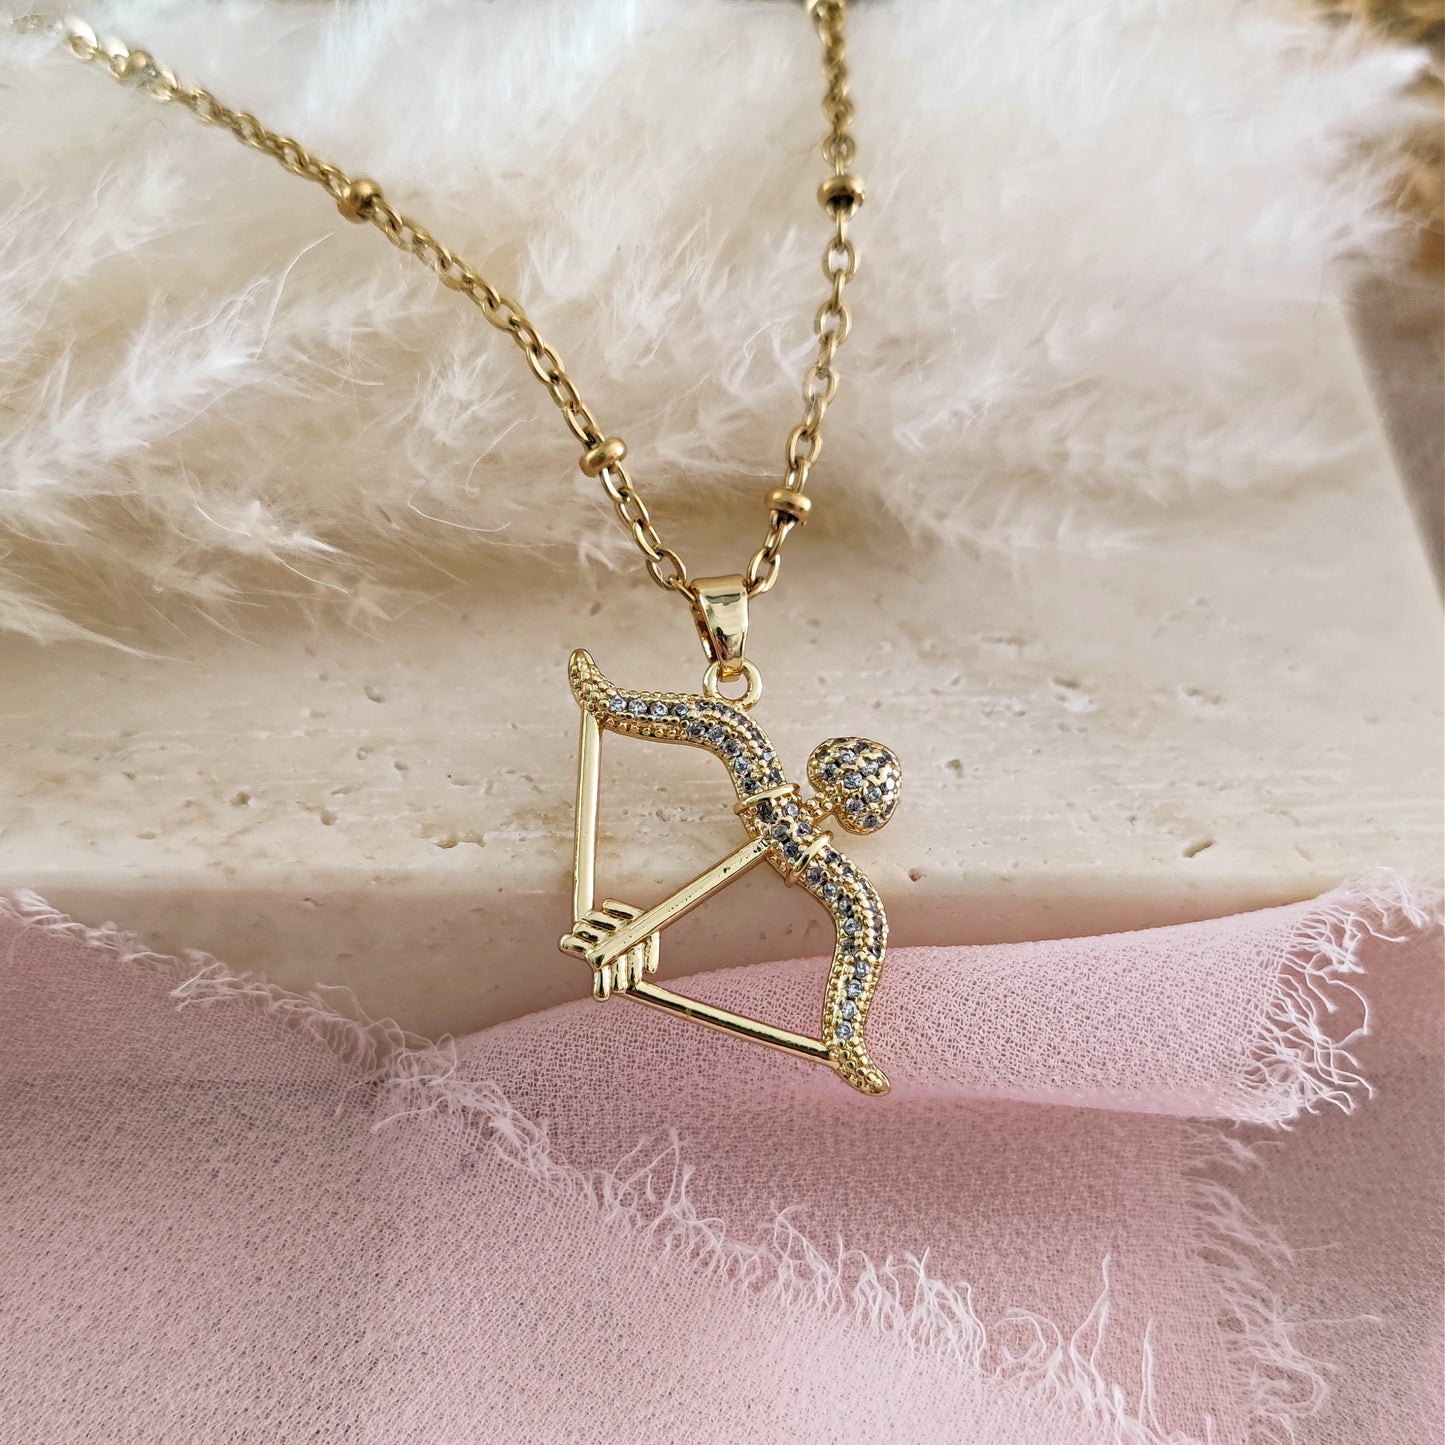 The Archer Necklace, Bow and Arrow Necklace, Archery Necklace, Bow Arrow Cupid Lover Necklace